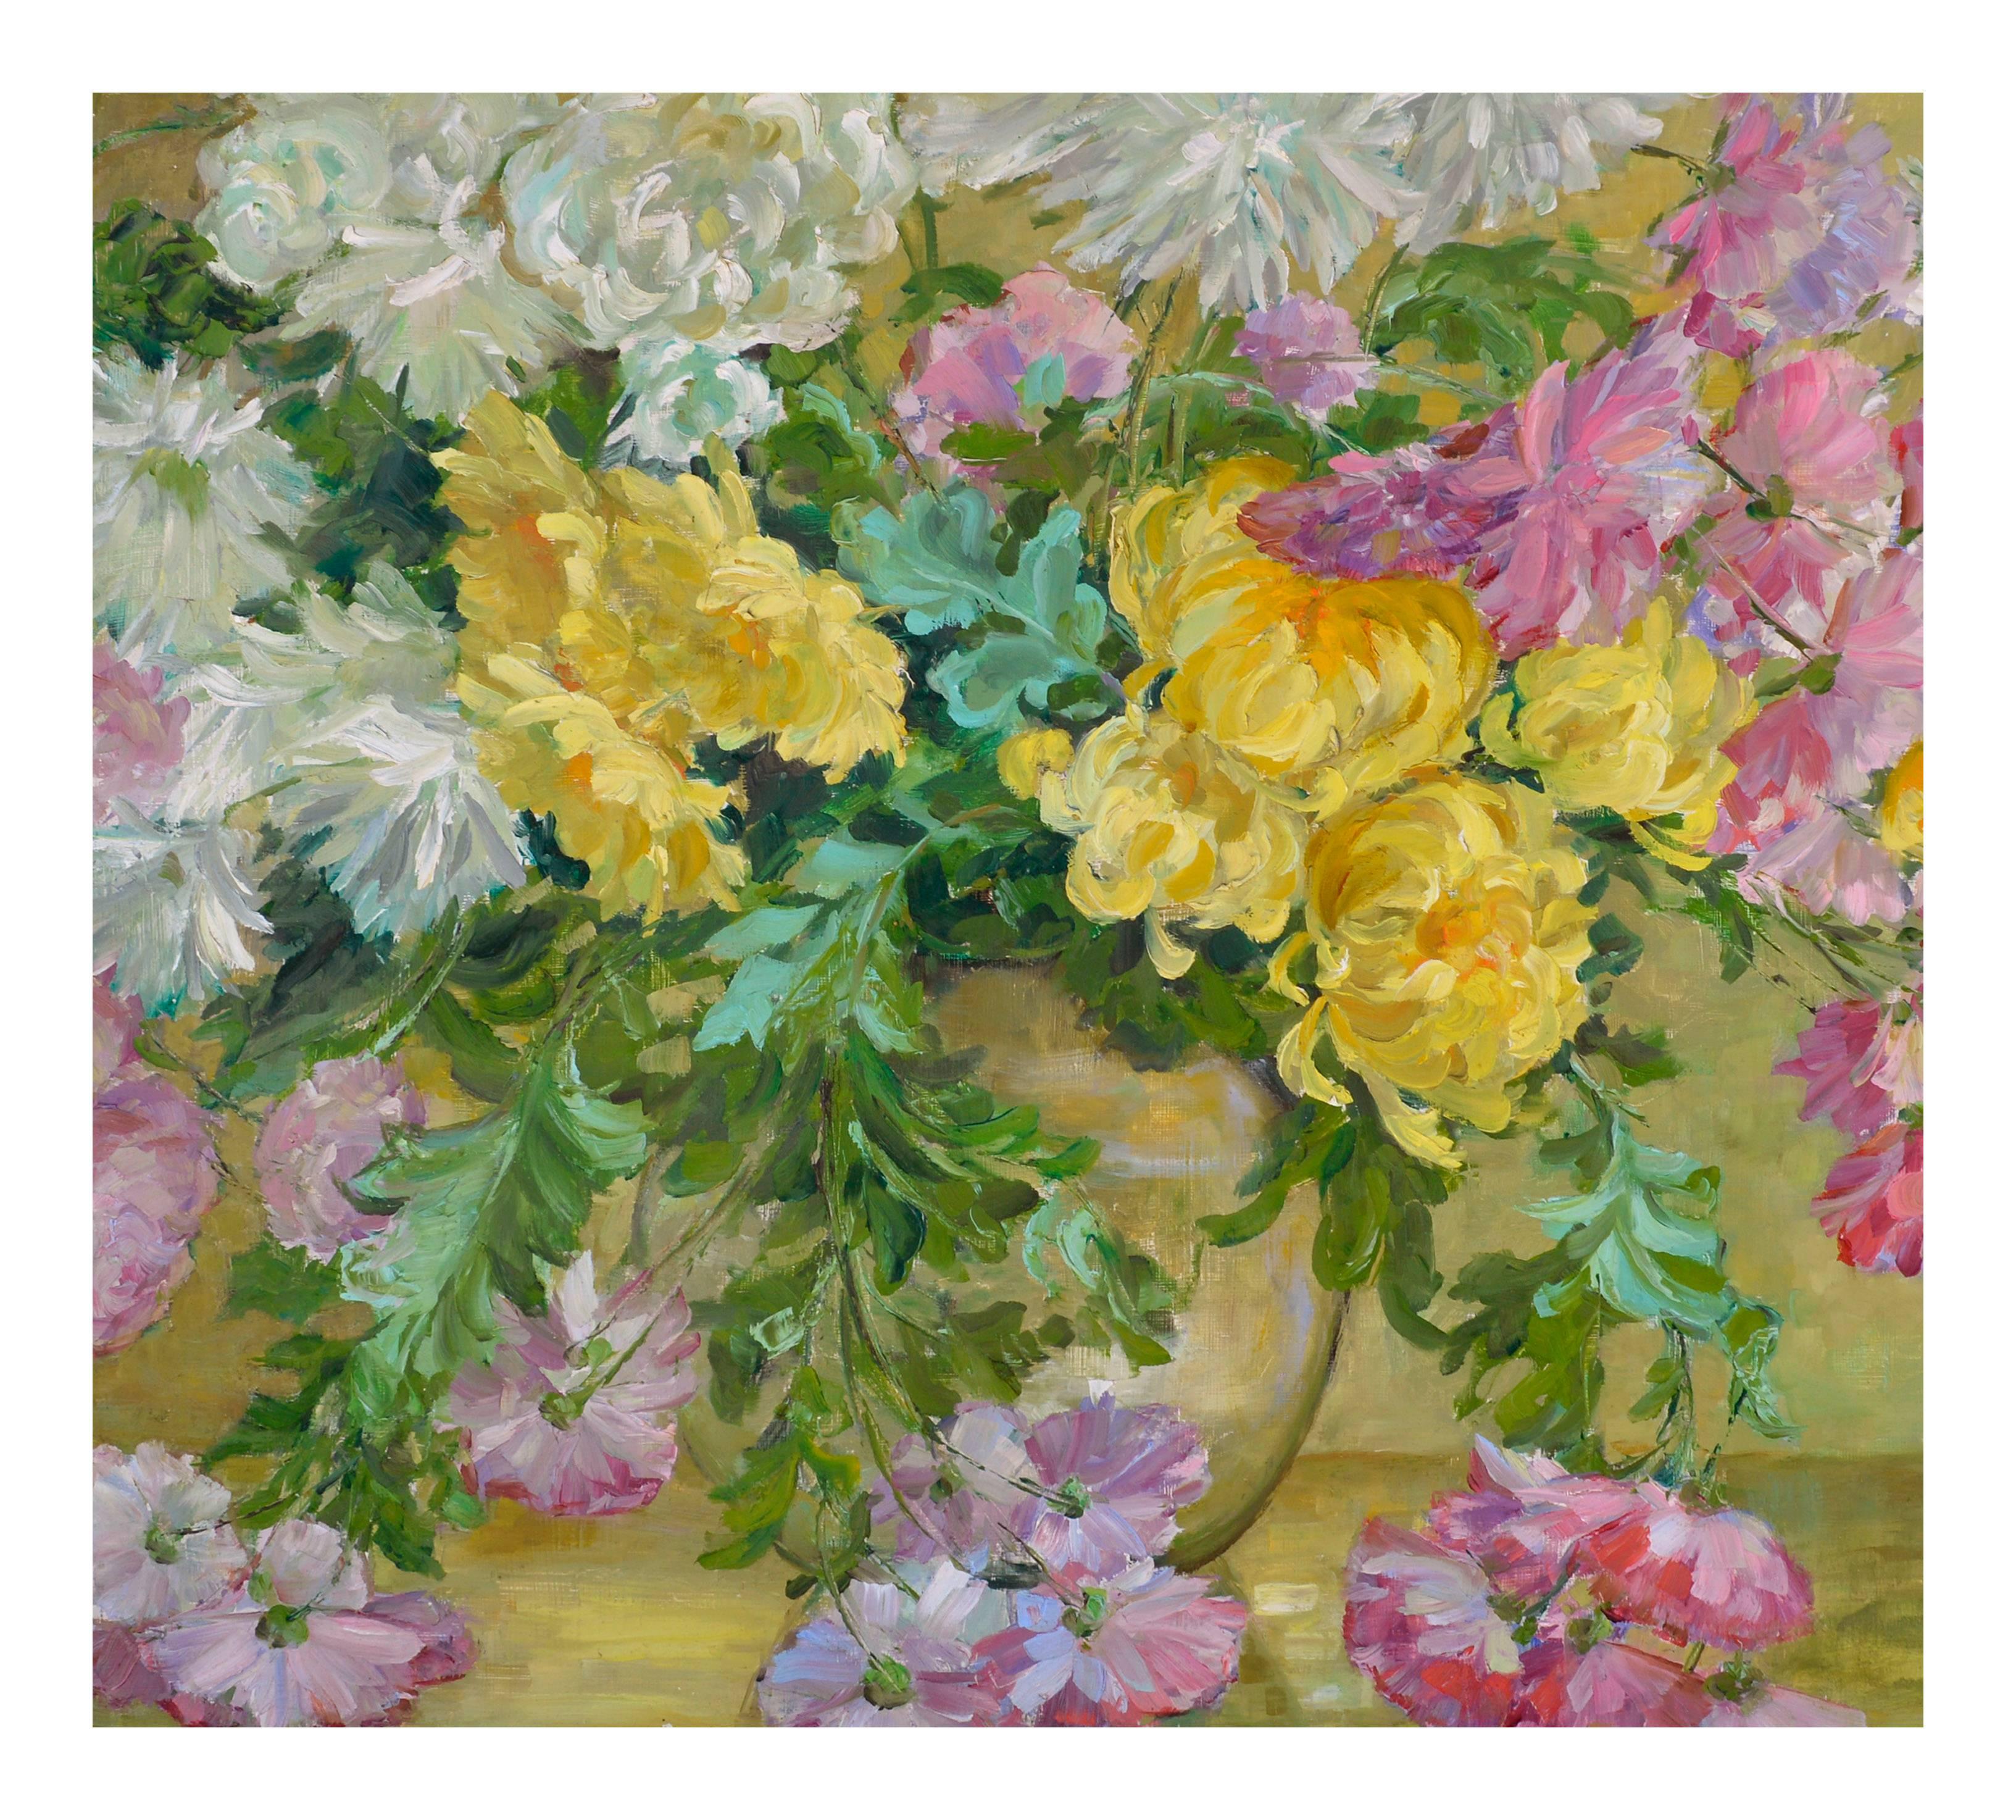 Chrysanthemums & Cosmos Bouquet  - American Impressionist Painting by Helen Enoch Gleiforst